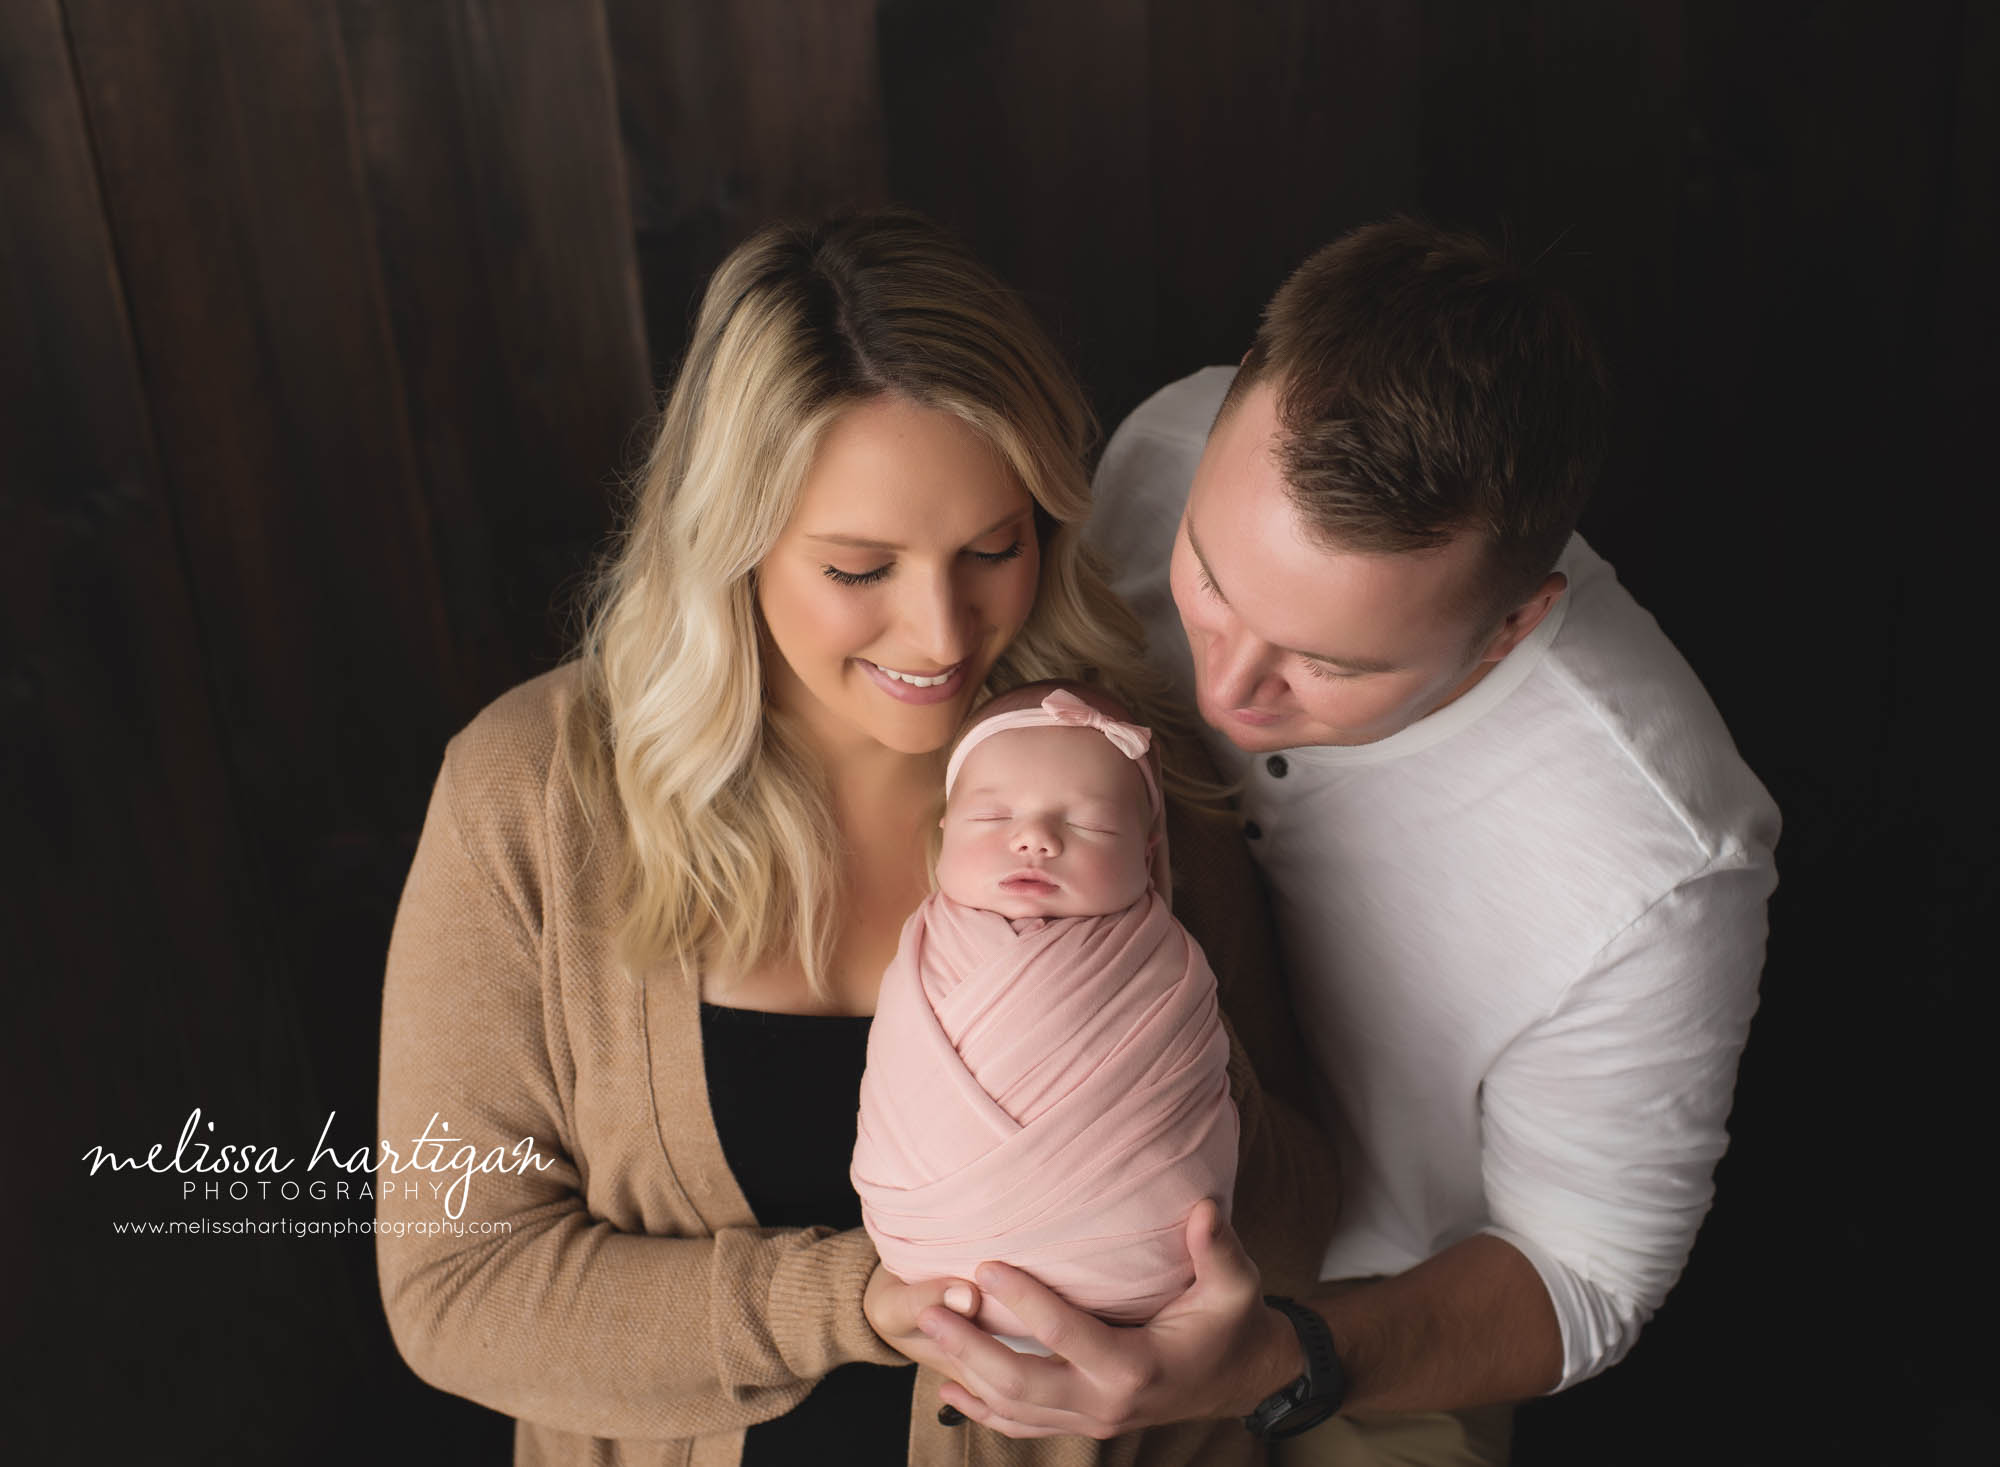 mom dad newborn baby daughter wrapped up family pose newborn photography CT